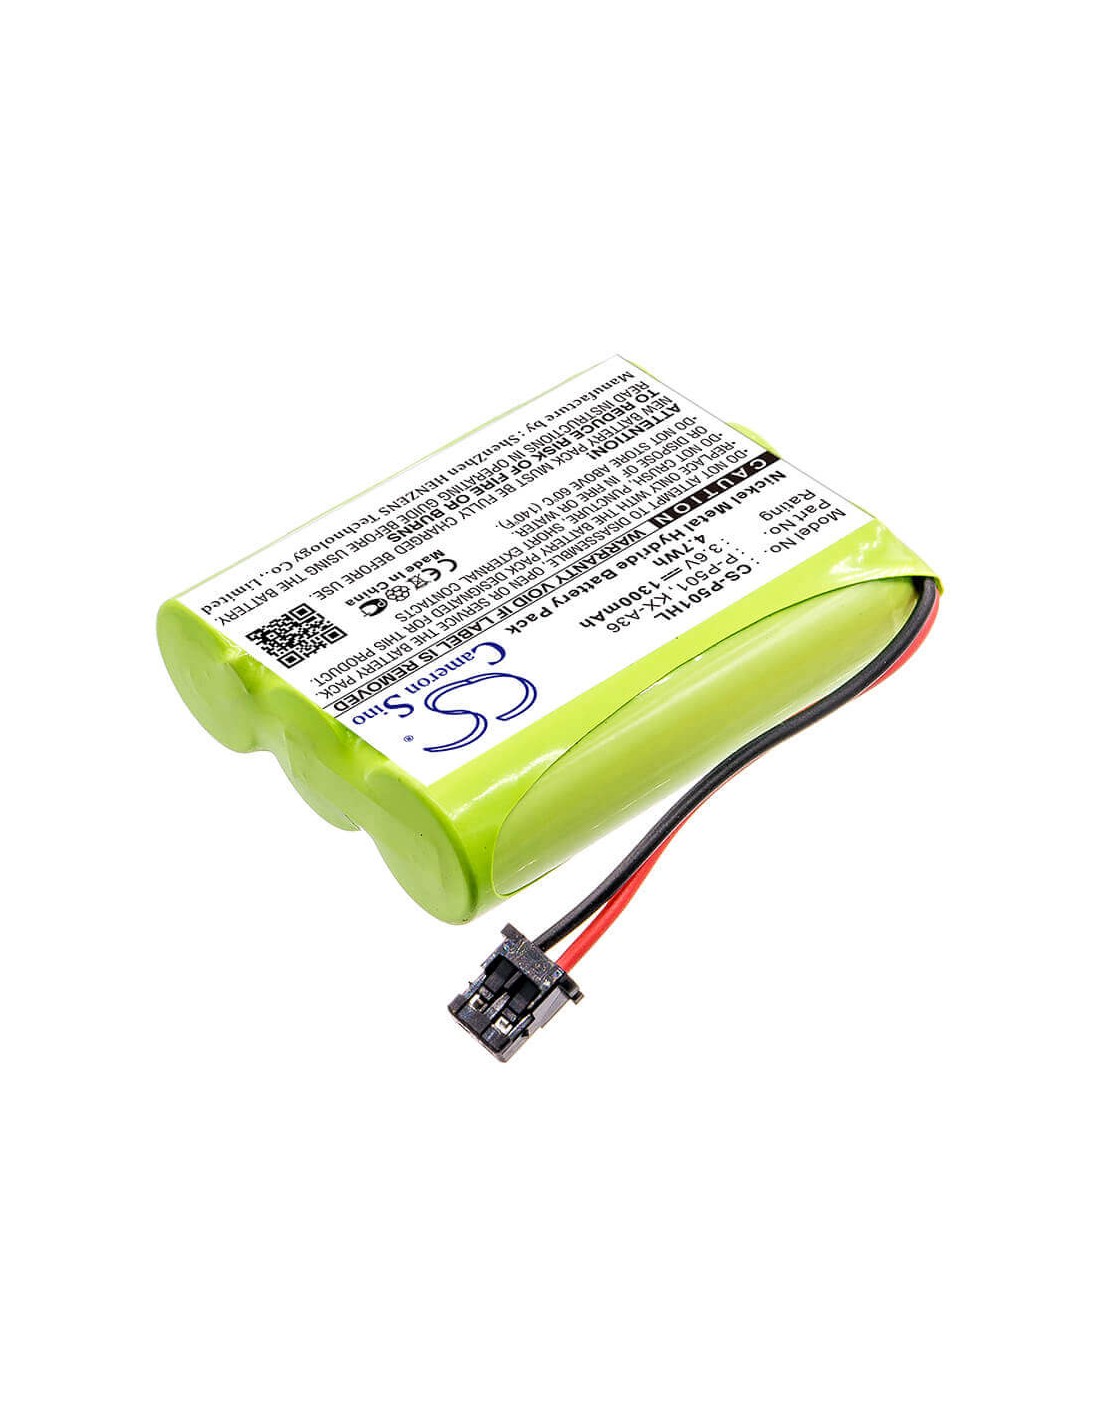 Battery for Sanyo, 23621, 3n-600aa(mtm), Cl-100w, Cl-200, 3.6V, 1300mAh - 4.68Wh